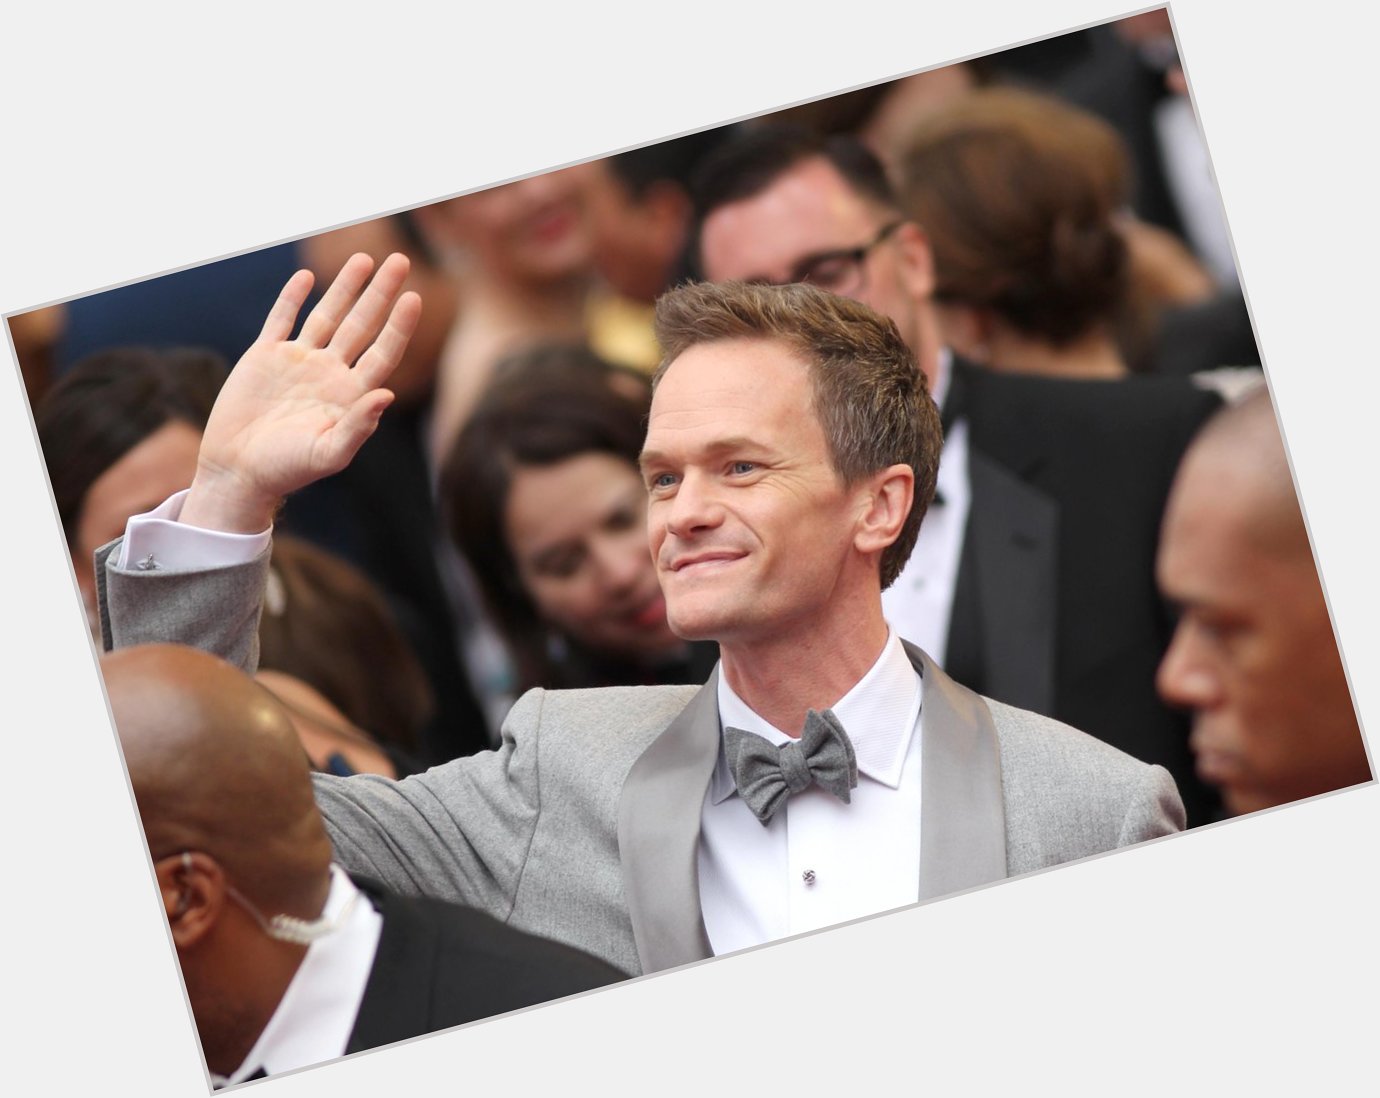 Wishing a happy birthday to one of the best actor-host-magician-Hedwigs around, Neil Patrick Harris (ActuallyNPH)! 